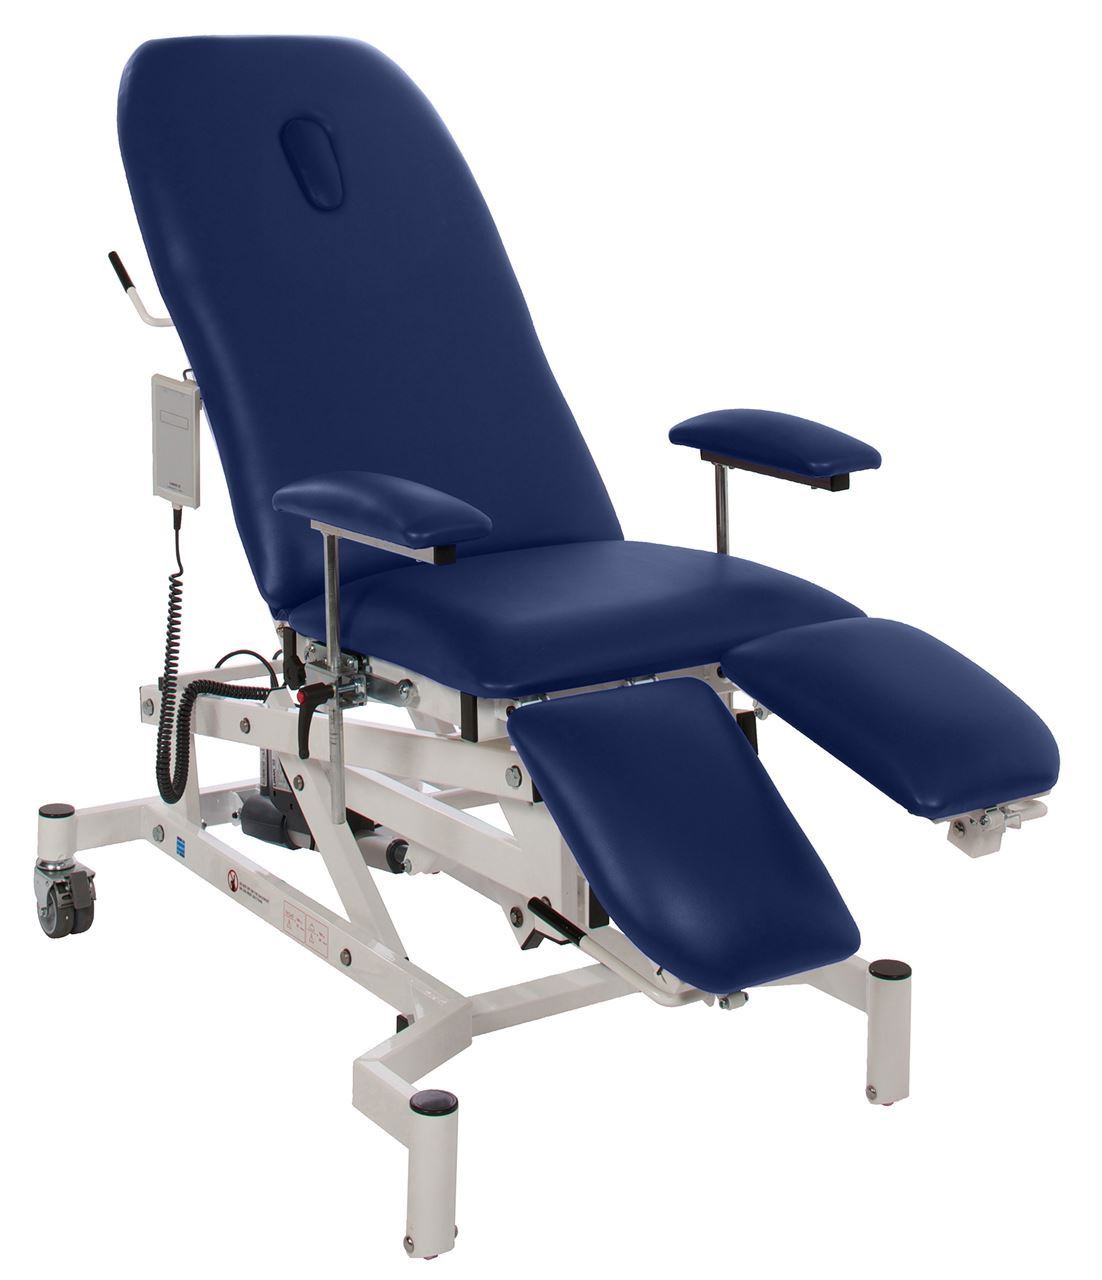  Doherty Treatment Chair - Storm Blue